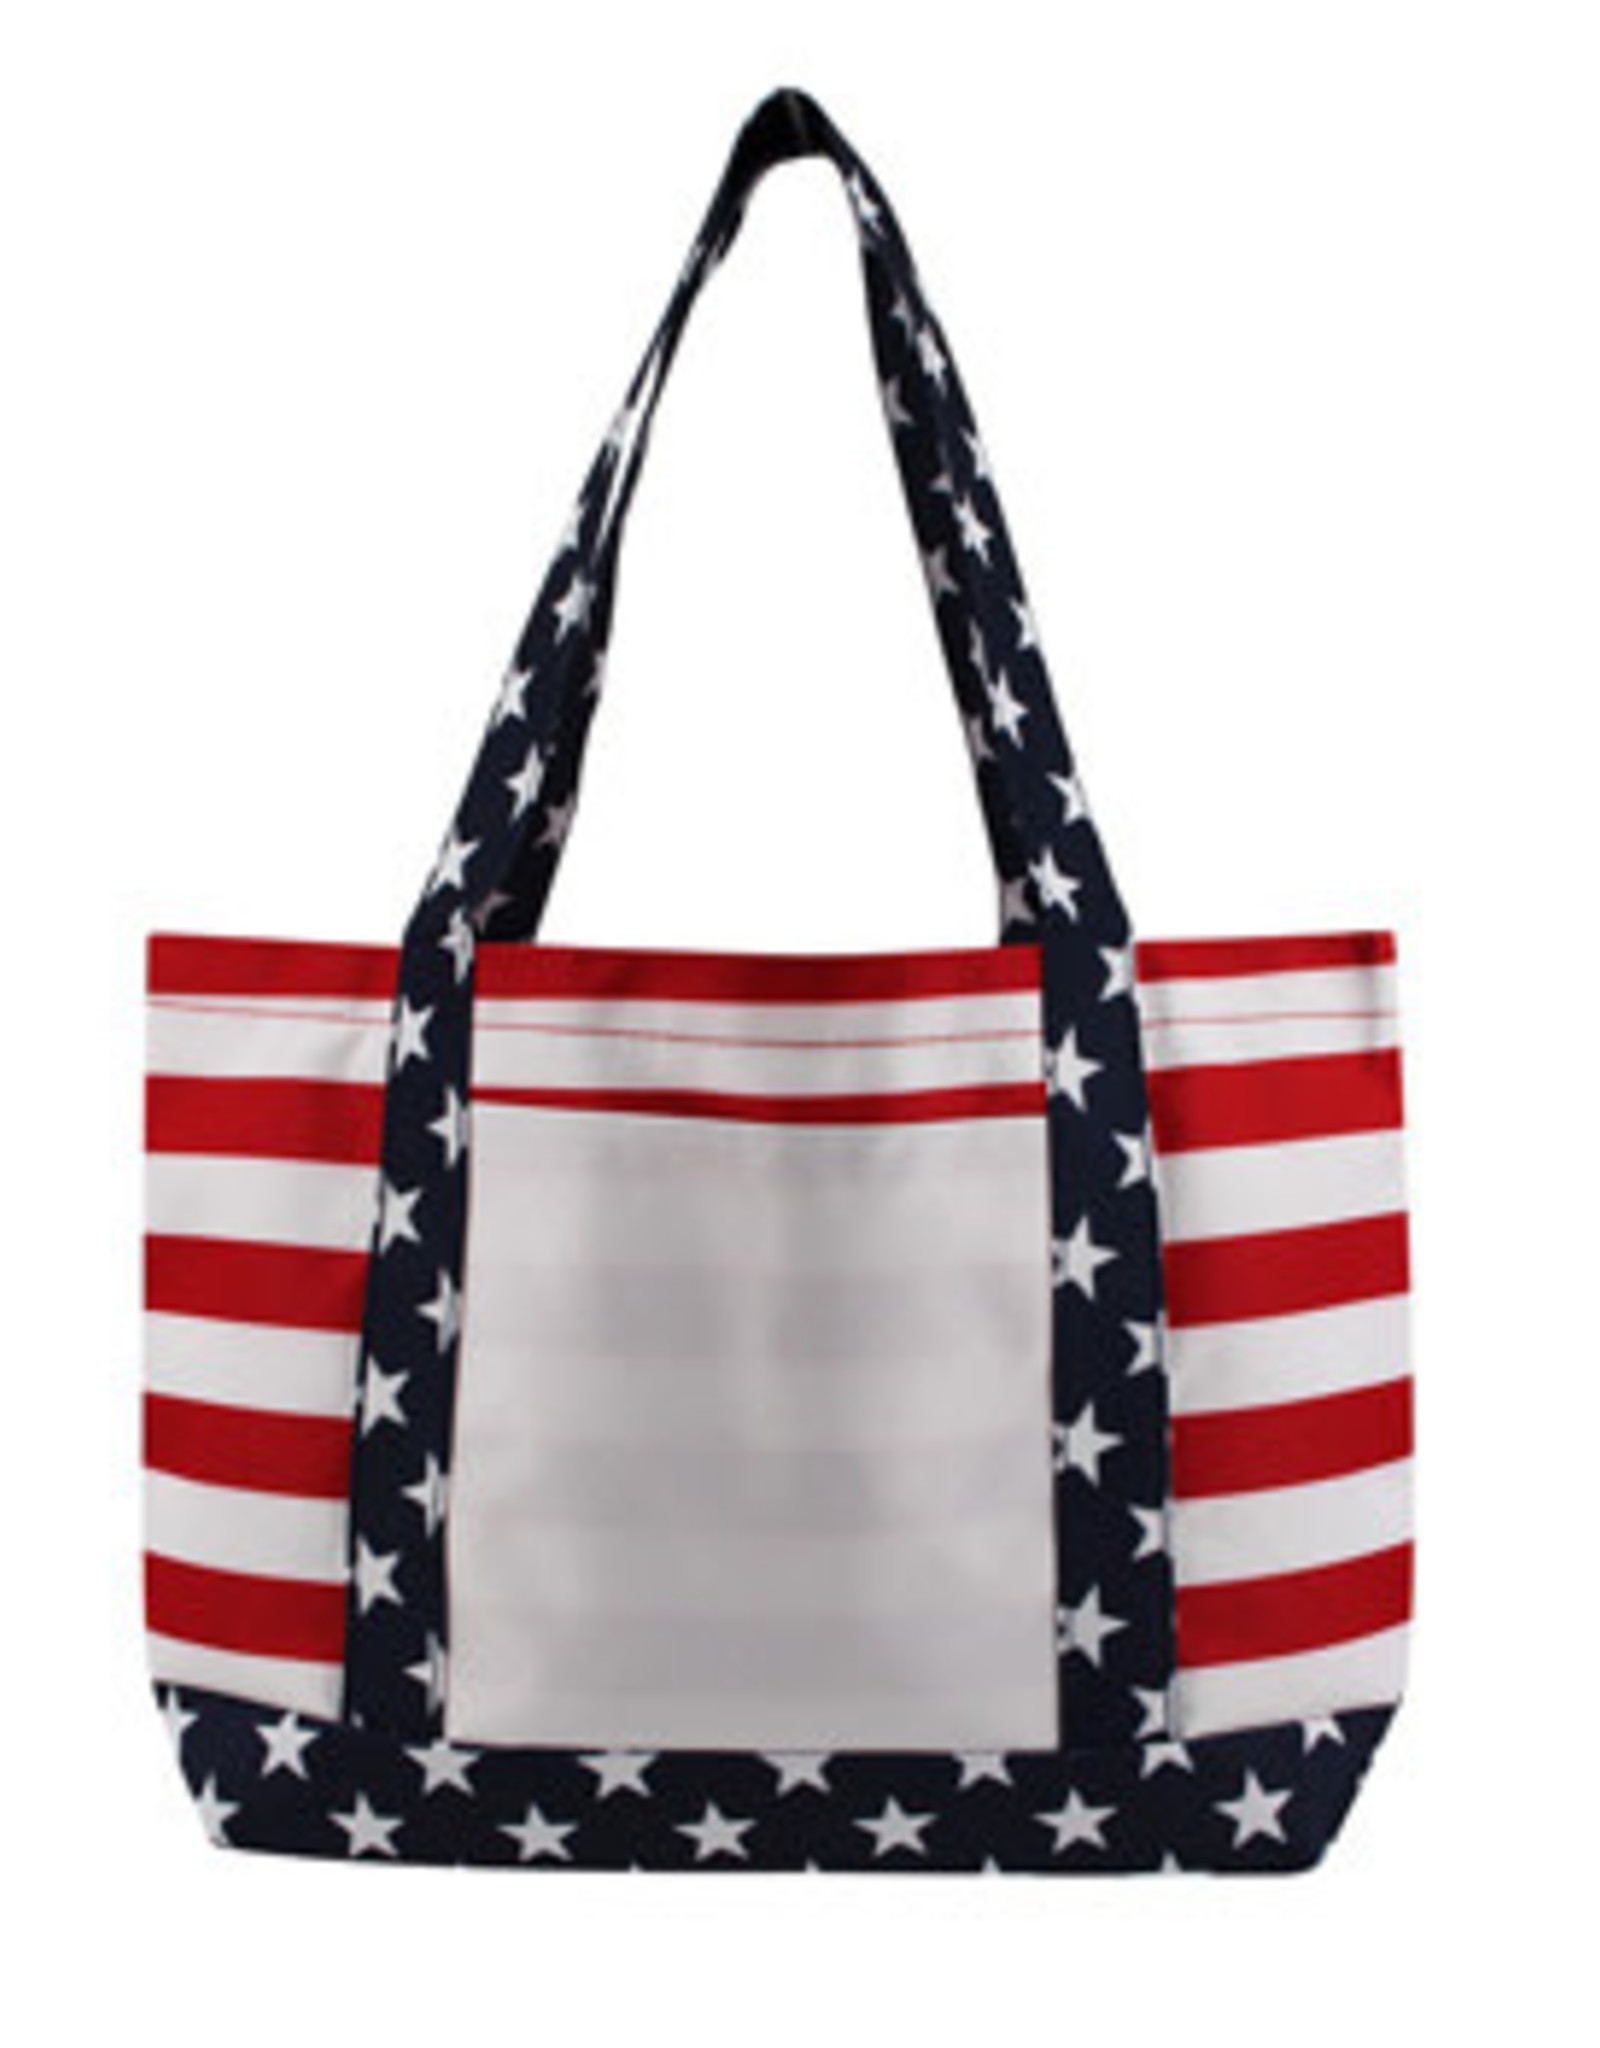 One American Tote